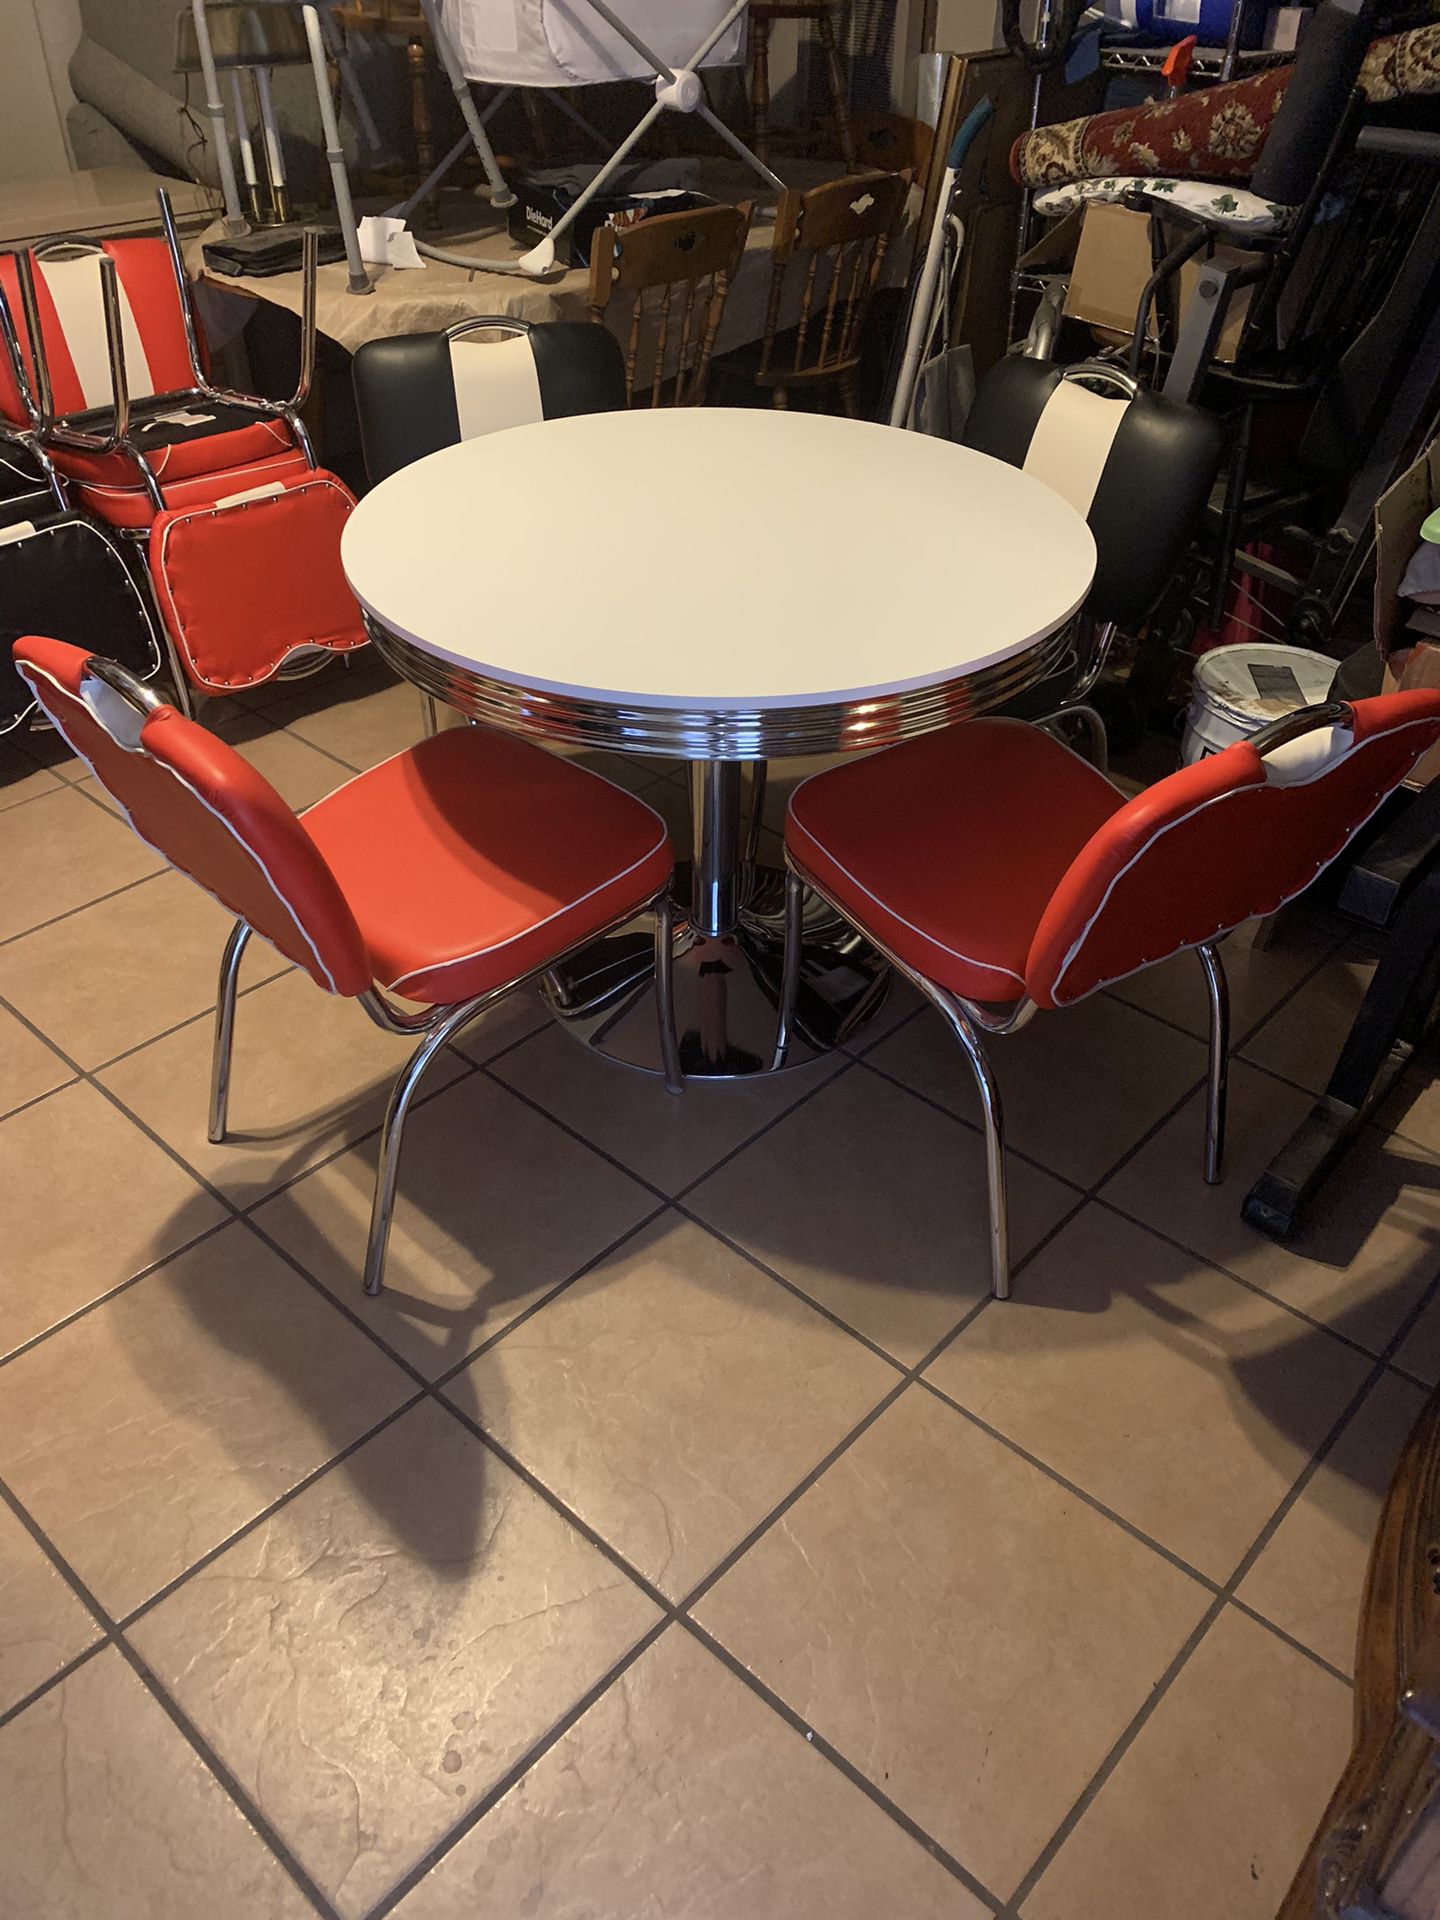 Route 66 Diner Kitchen Table And 4 Chairs 